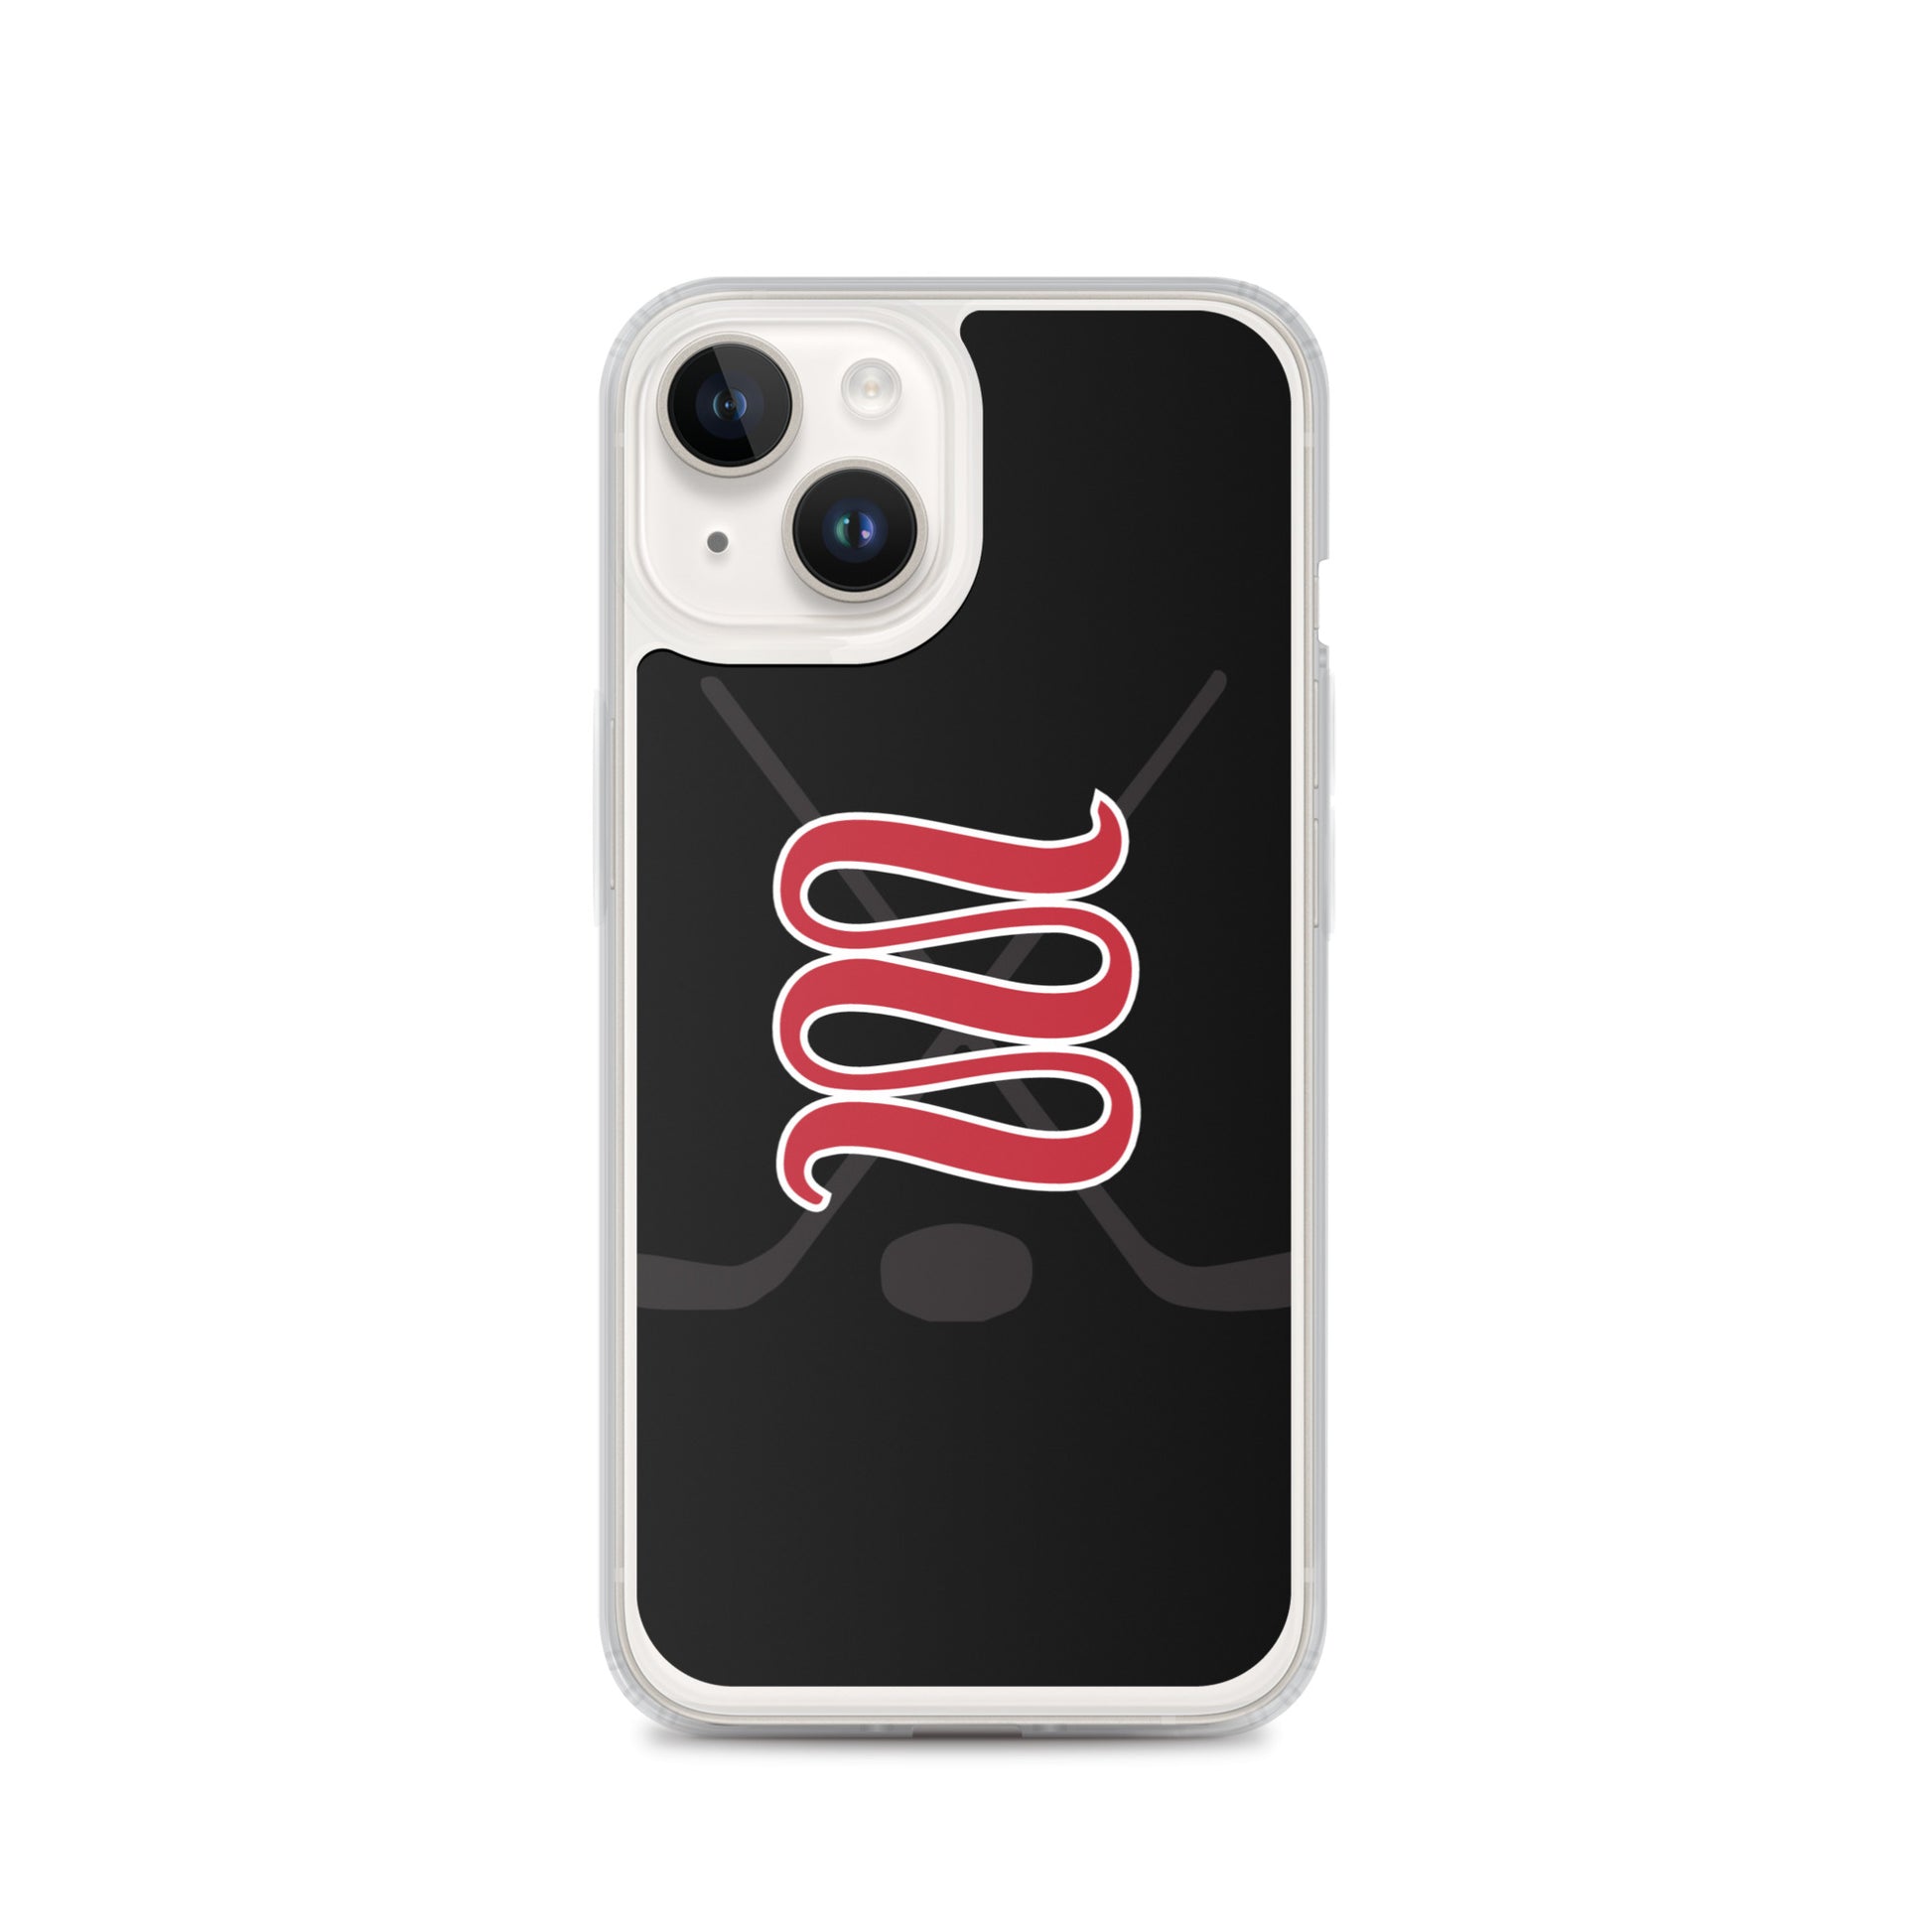 Smartphone with a clear case featuring a red hockey lace logo design on the back